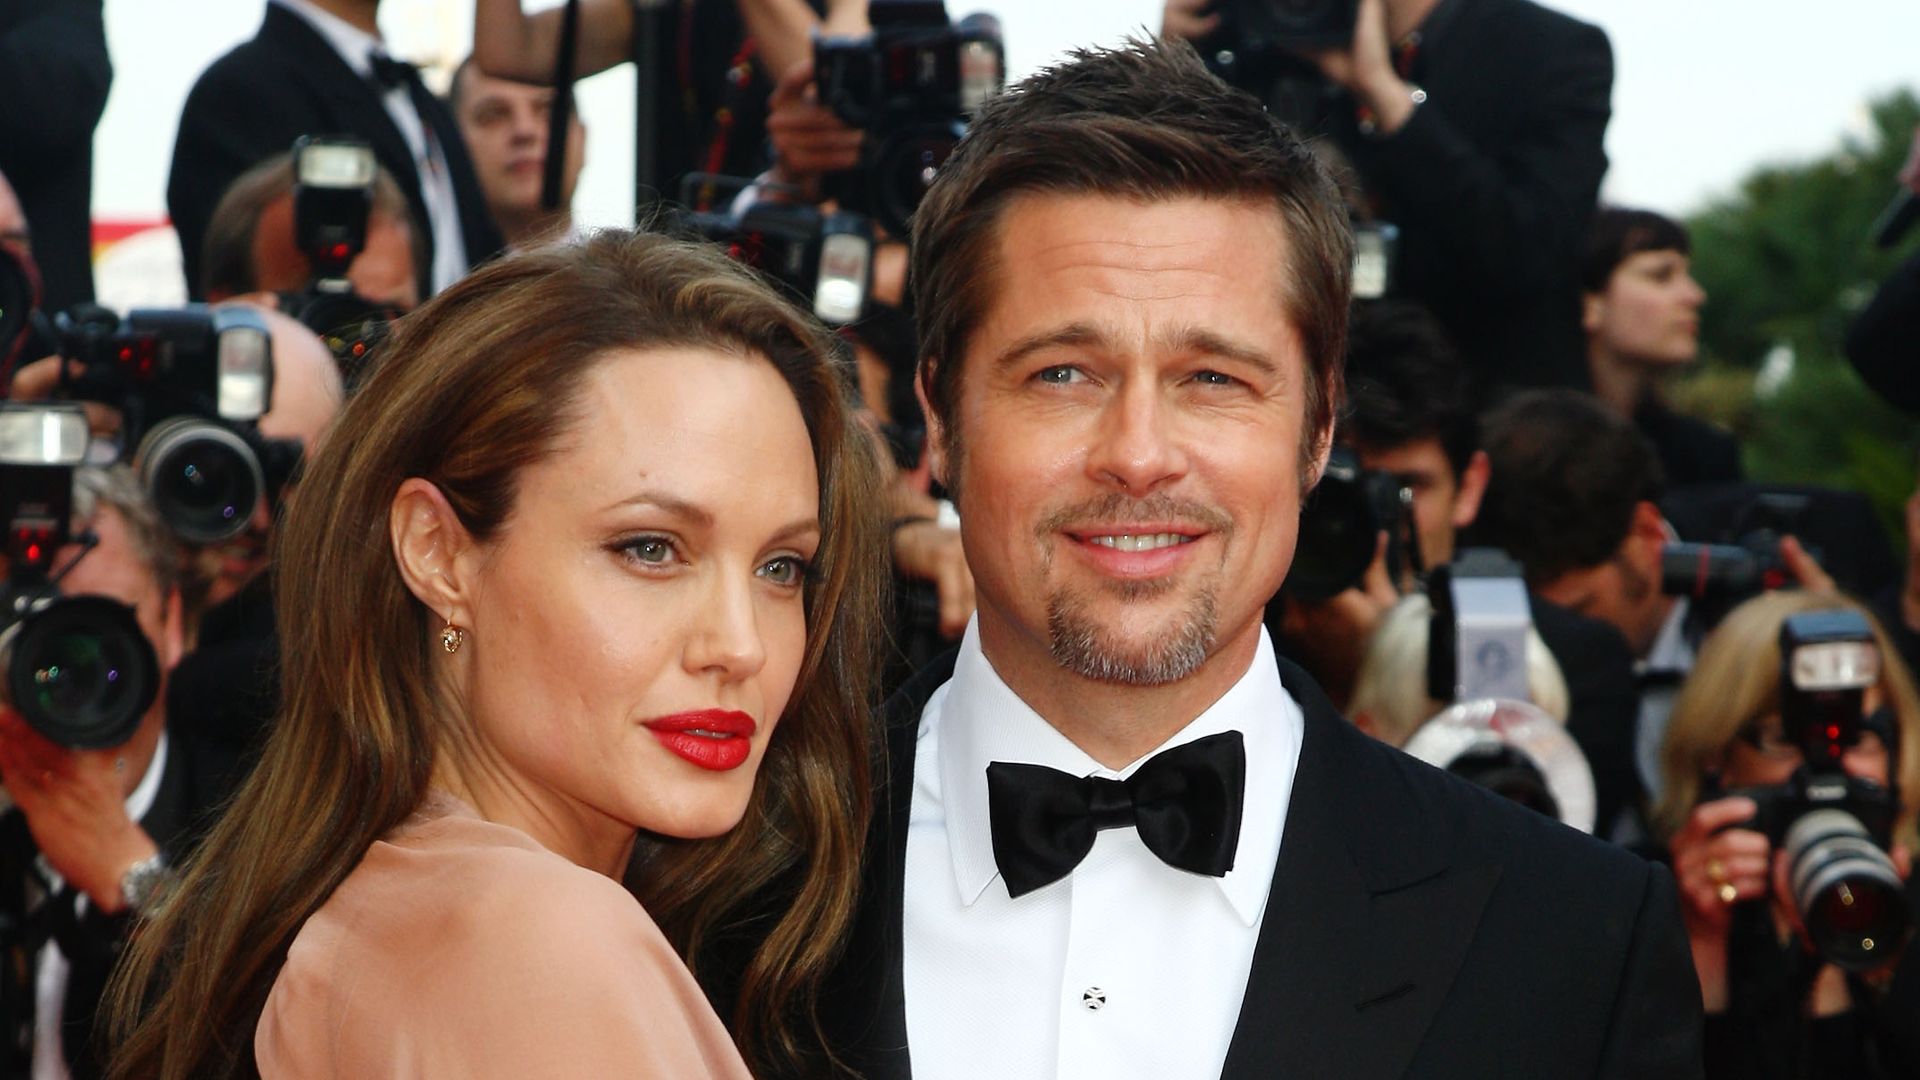 Brad Pitt and Angelina Jolie attend the Inglourious Basterds Premiere held at the Palais Des Festivals during the 62nd International Cannes Film Festival on May 20th, 2009 in Cannes, France